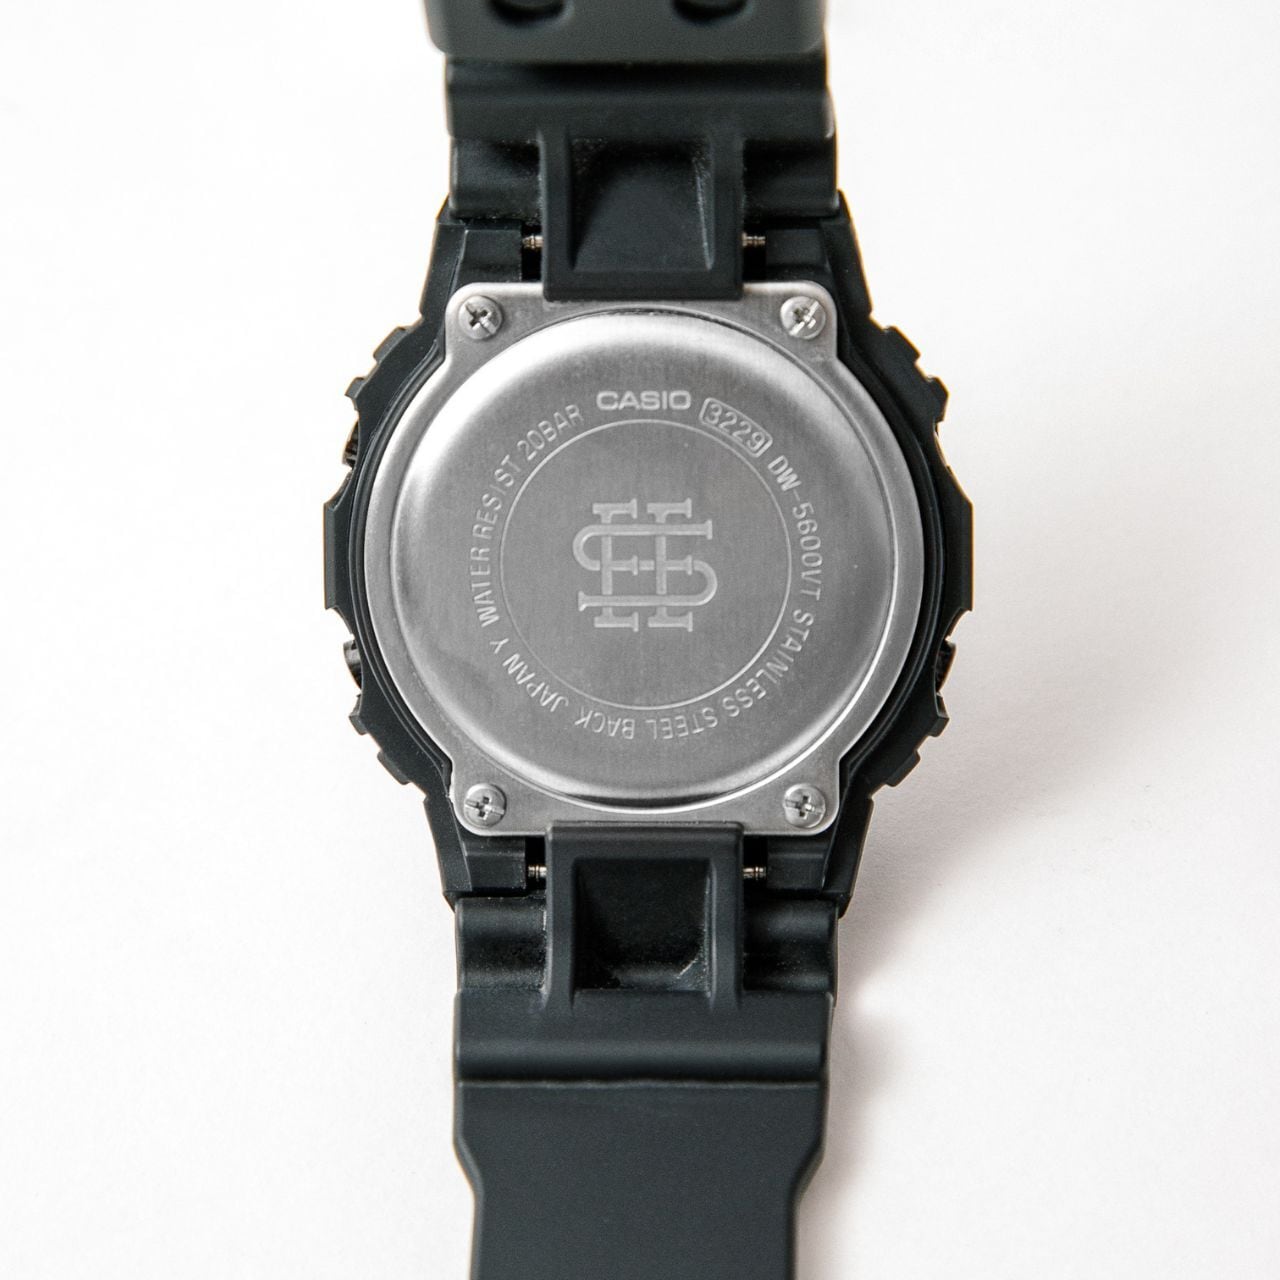 SEE SEE×G-Shock DW5600 | Yes Good Market ONLINE